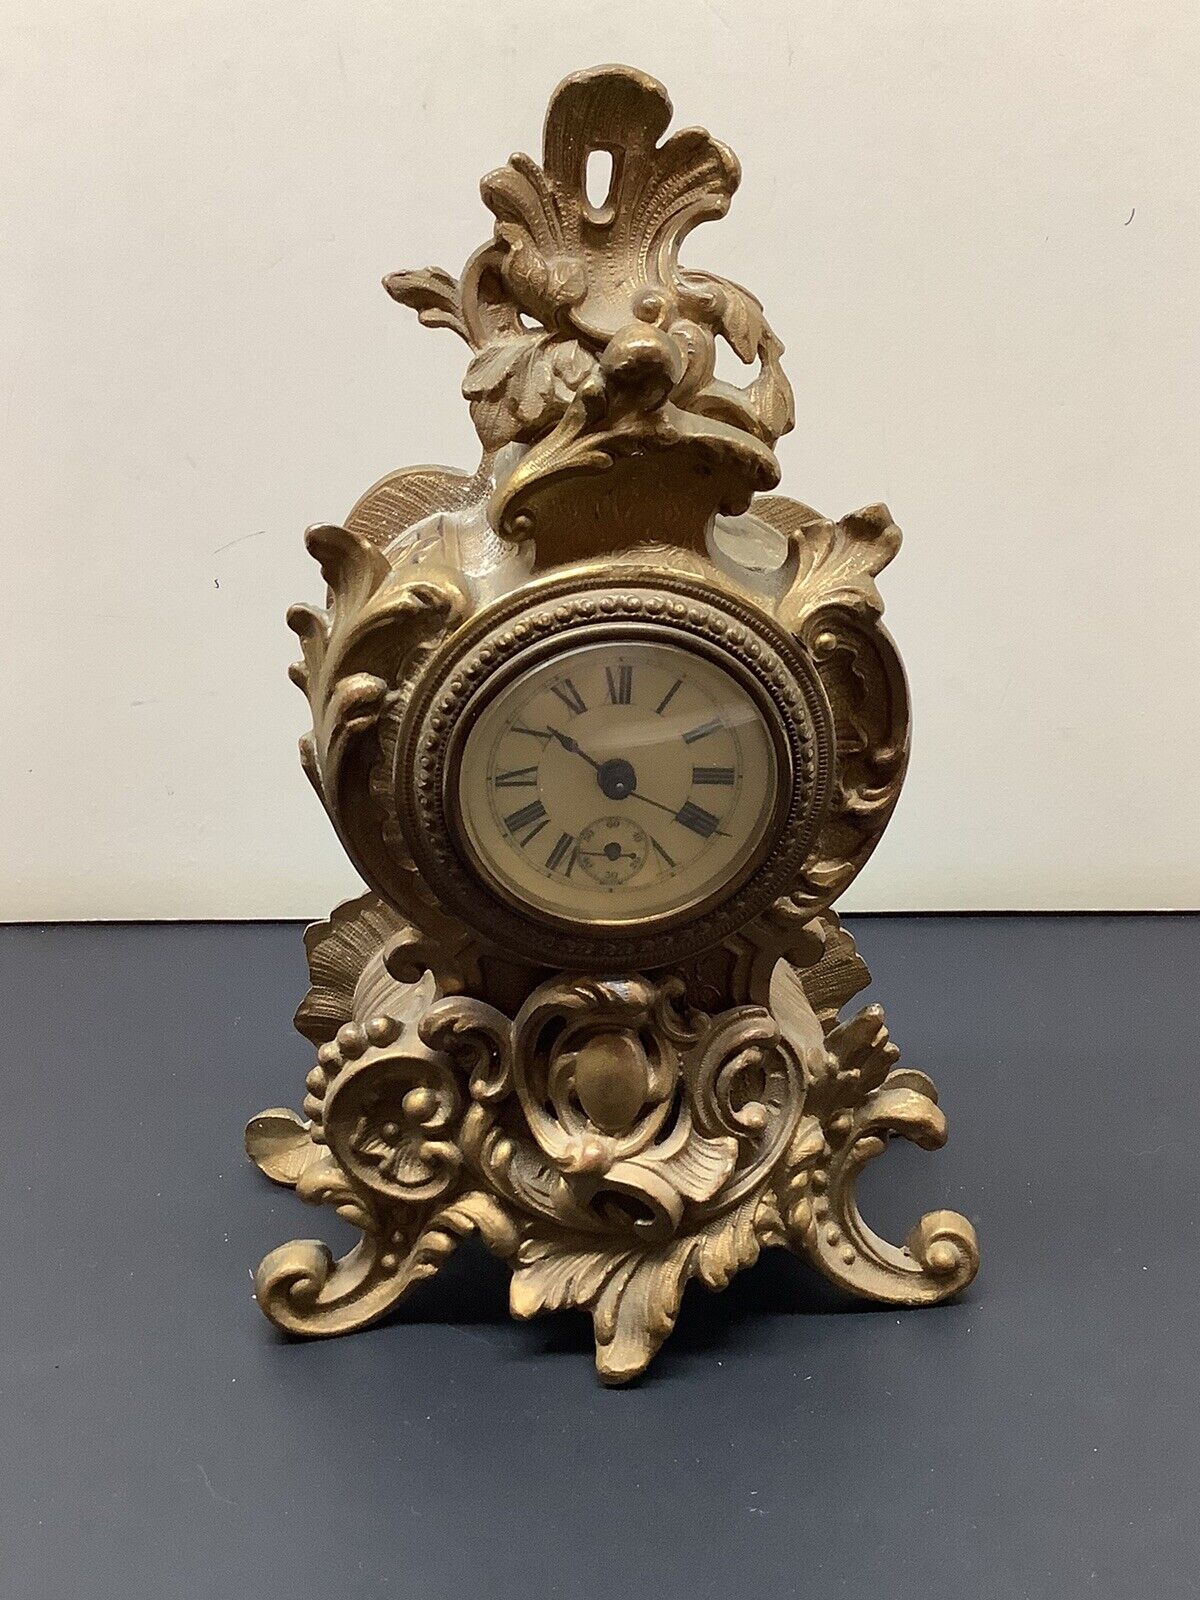 Antique Waterbury Brass Table Wind Clock Pat 1891 Great Working Condition 8.5”T